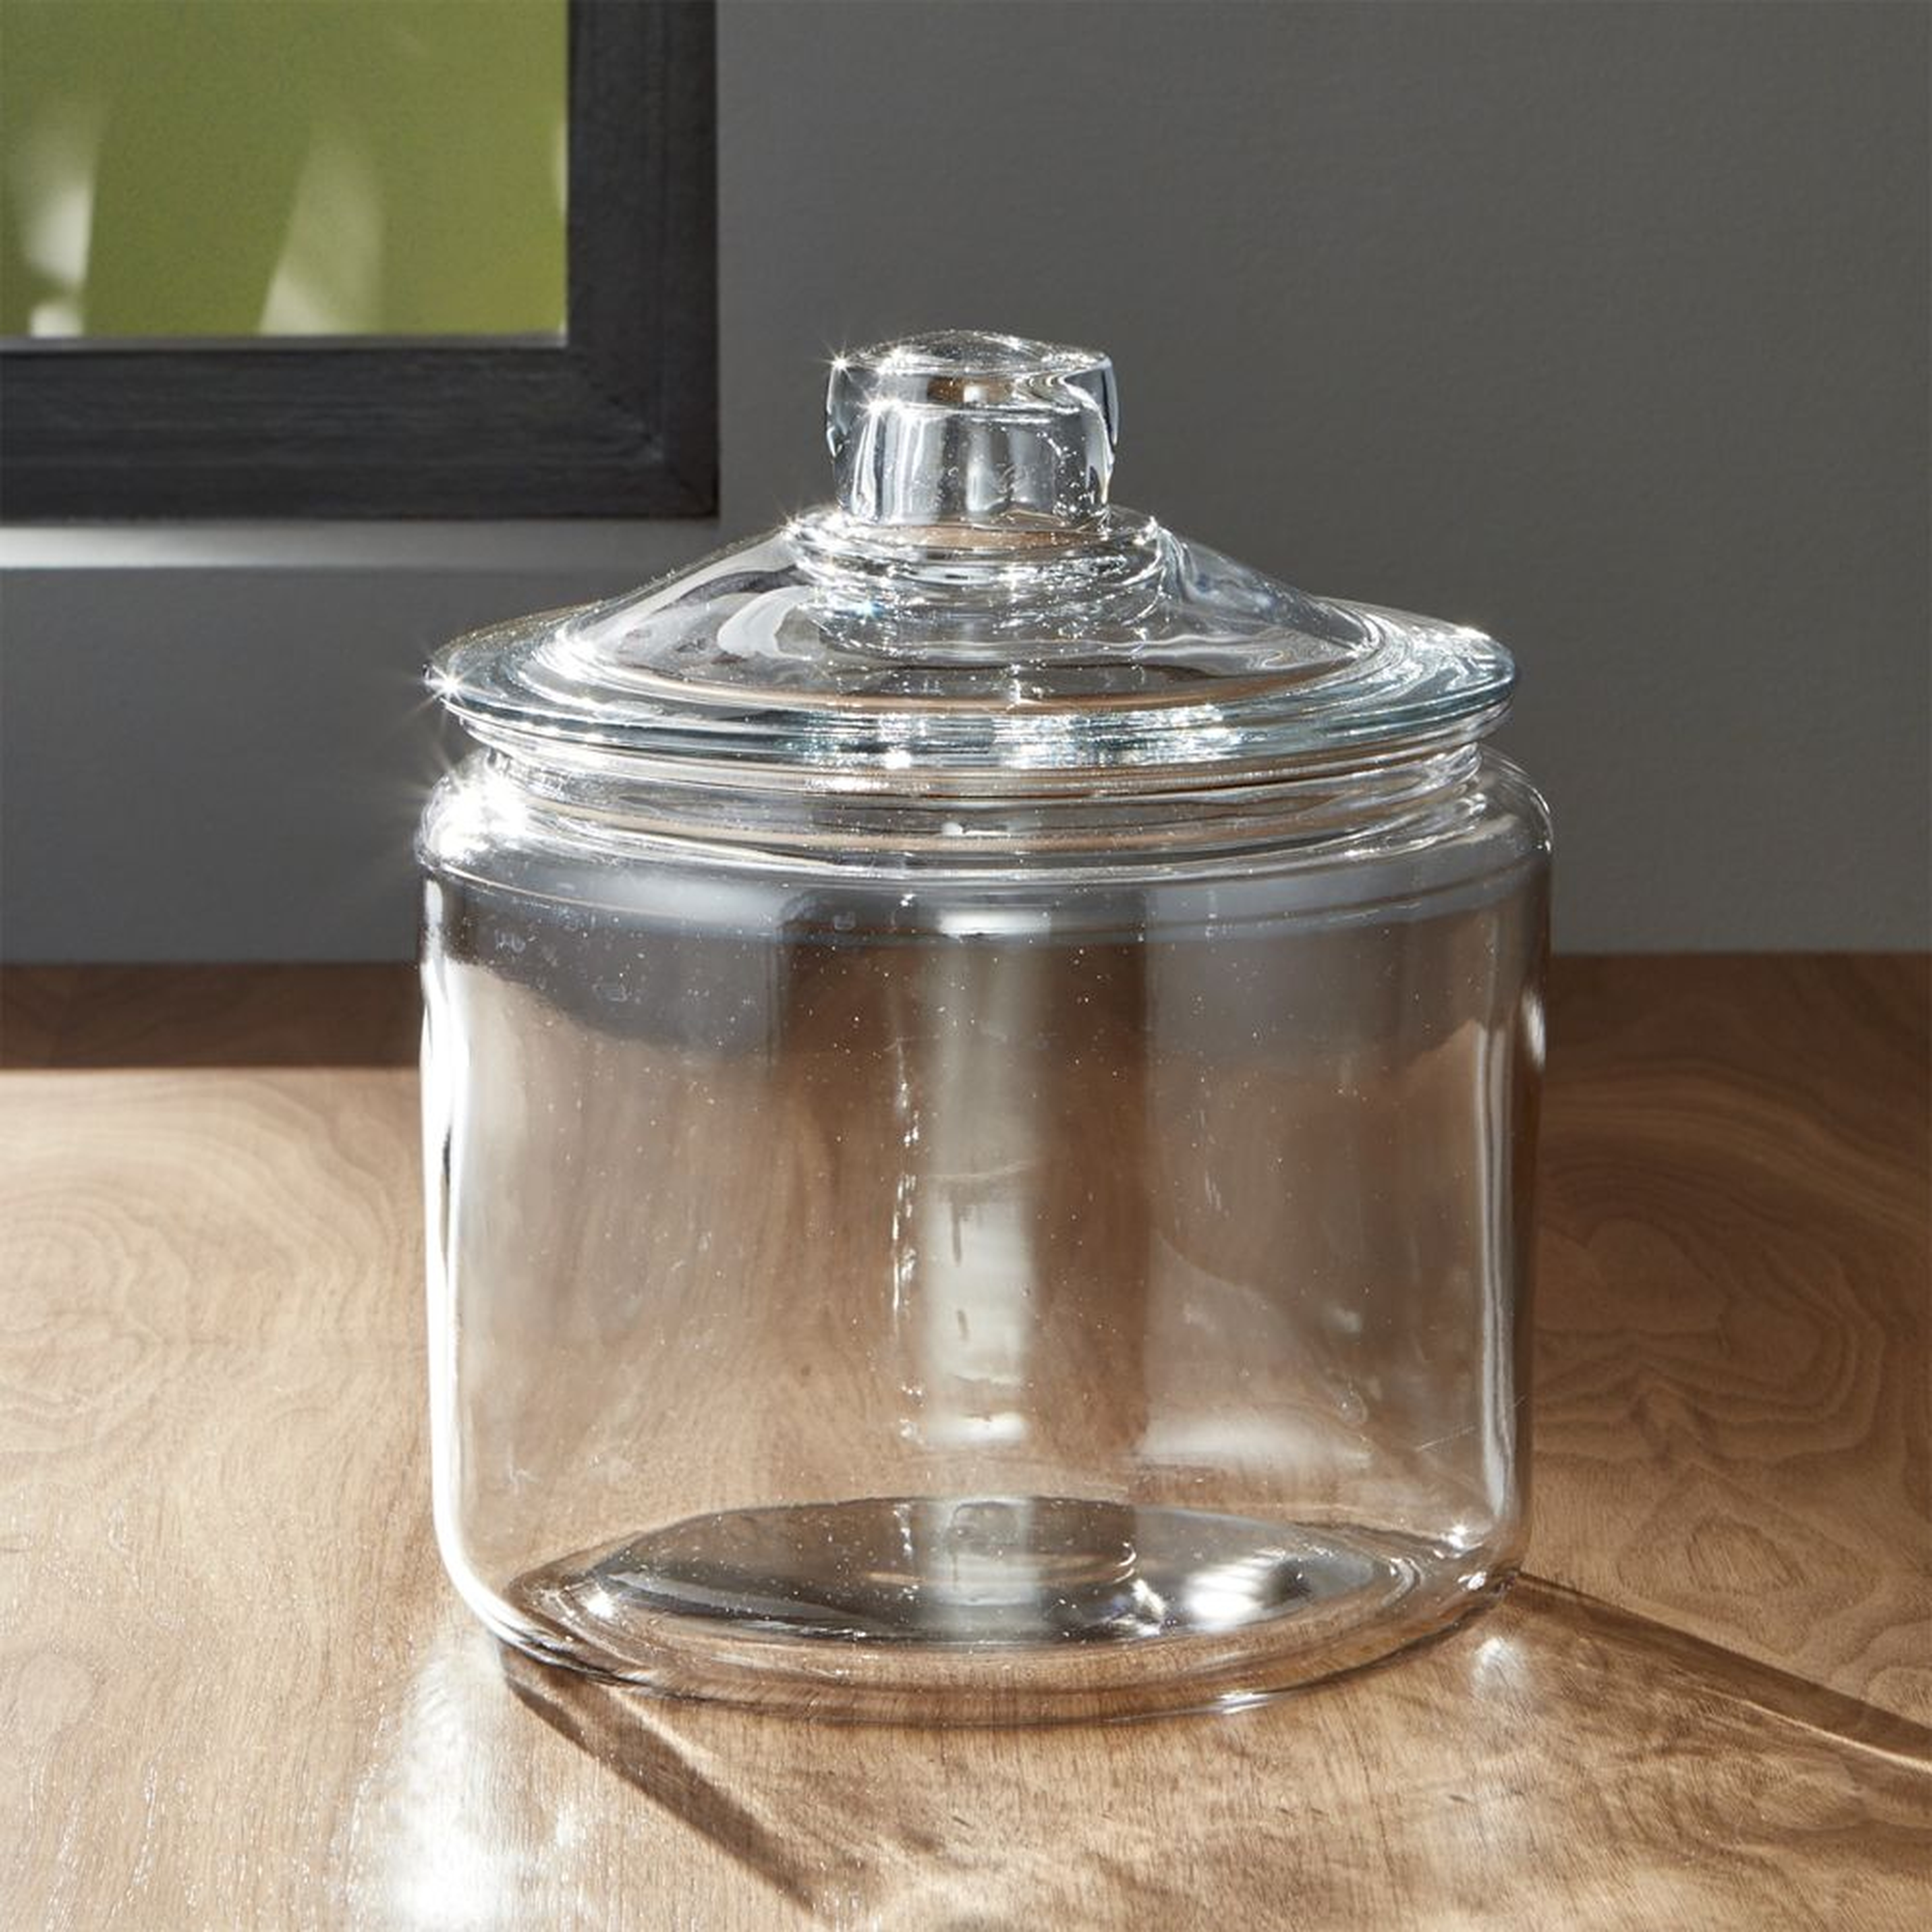 Heritage Hill 96-Oz. Glass Jar with Lid - Crate and Barrel